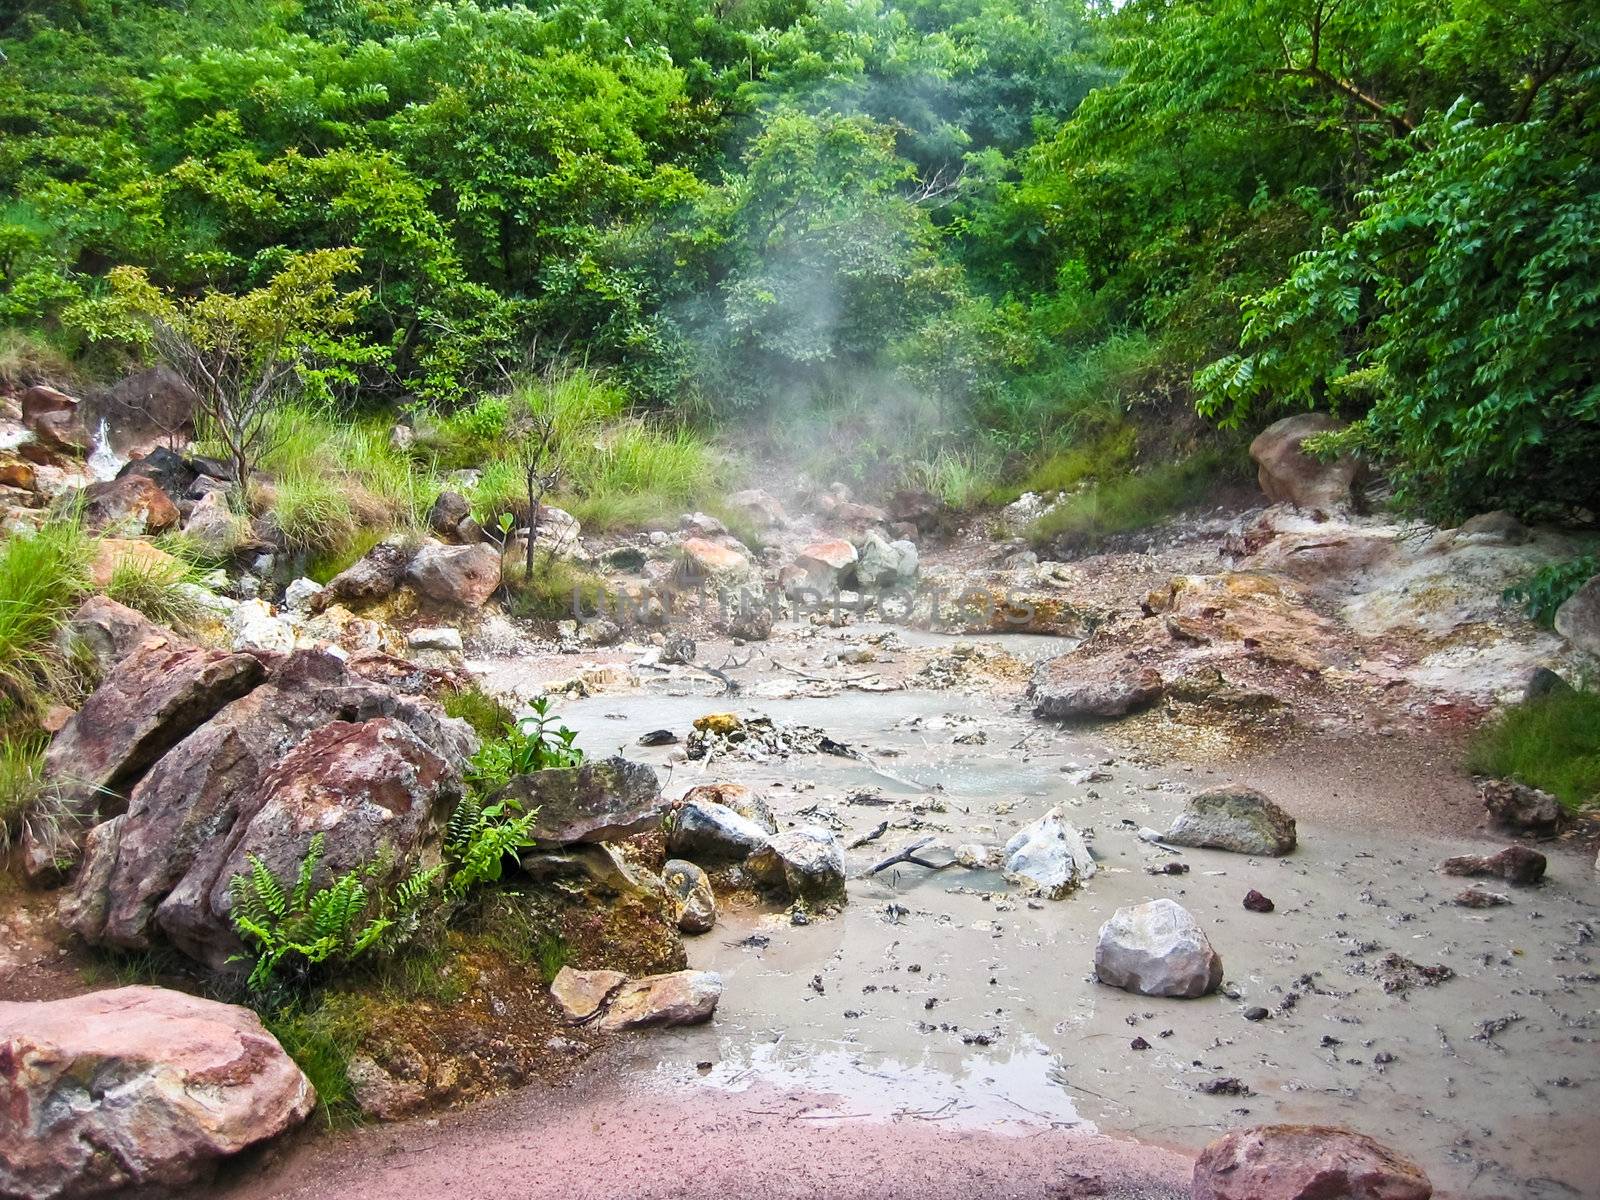 volcanic mud pool with bubbles in a green environment 
